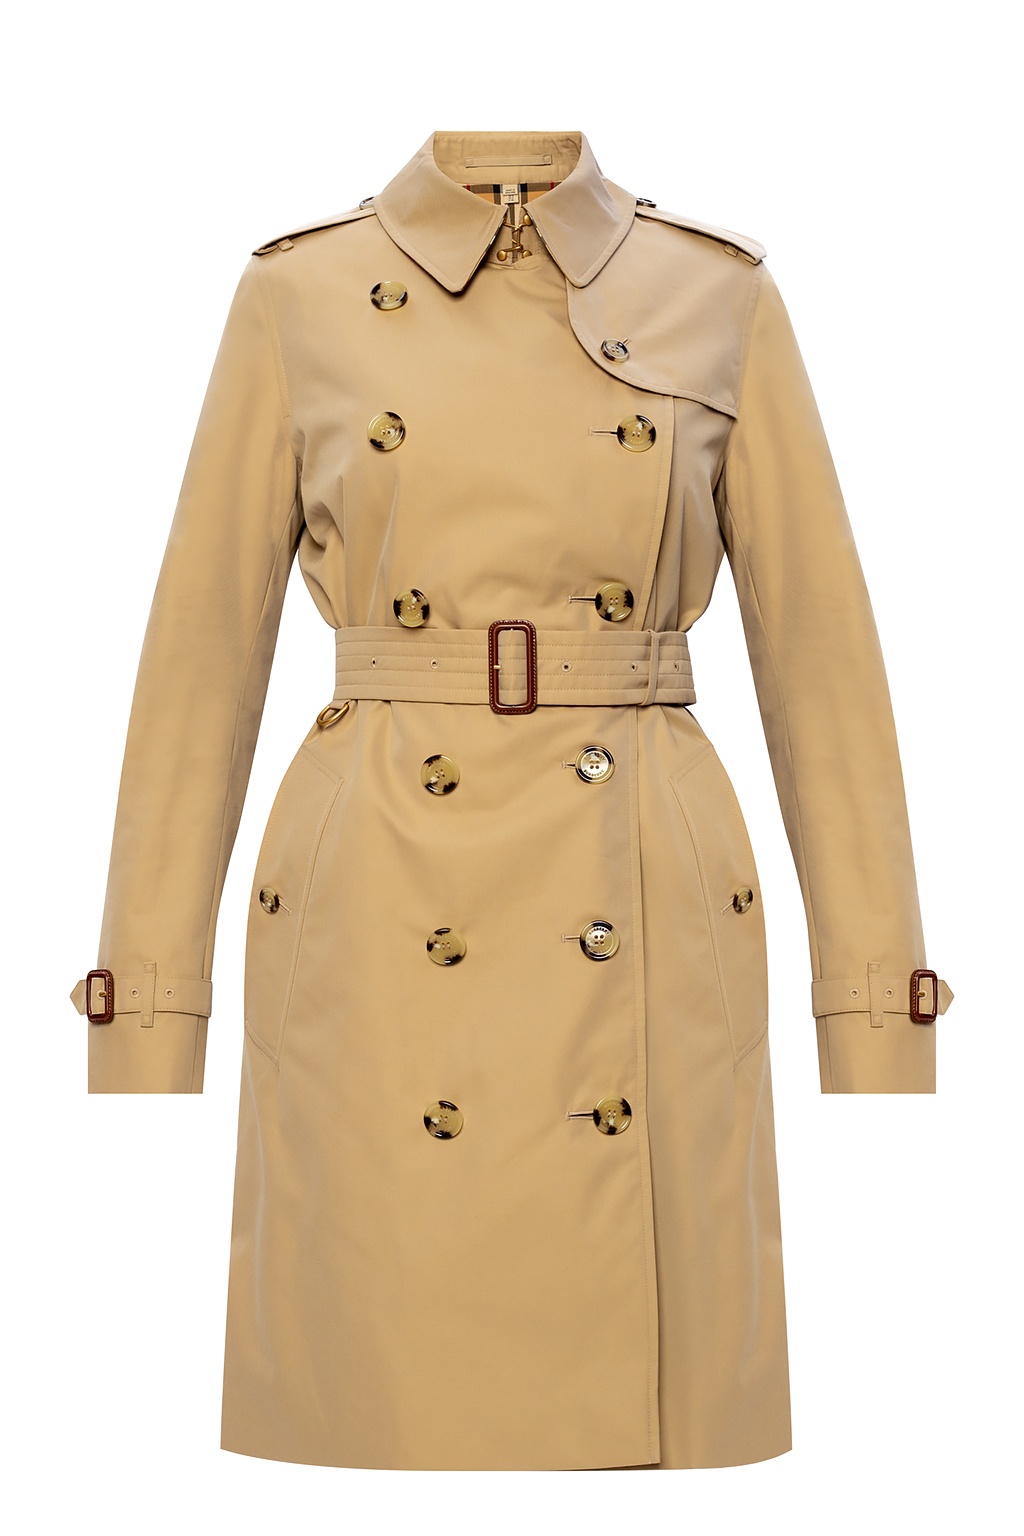 Burberry Trench with logo | Women's Clothing | Vitkac